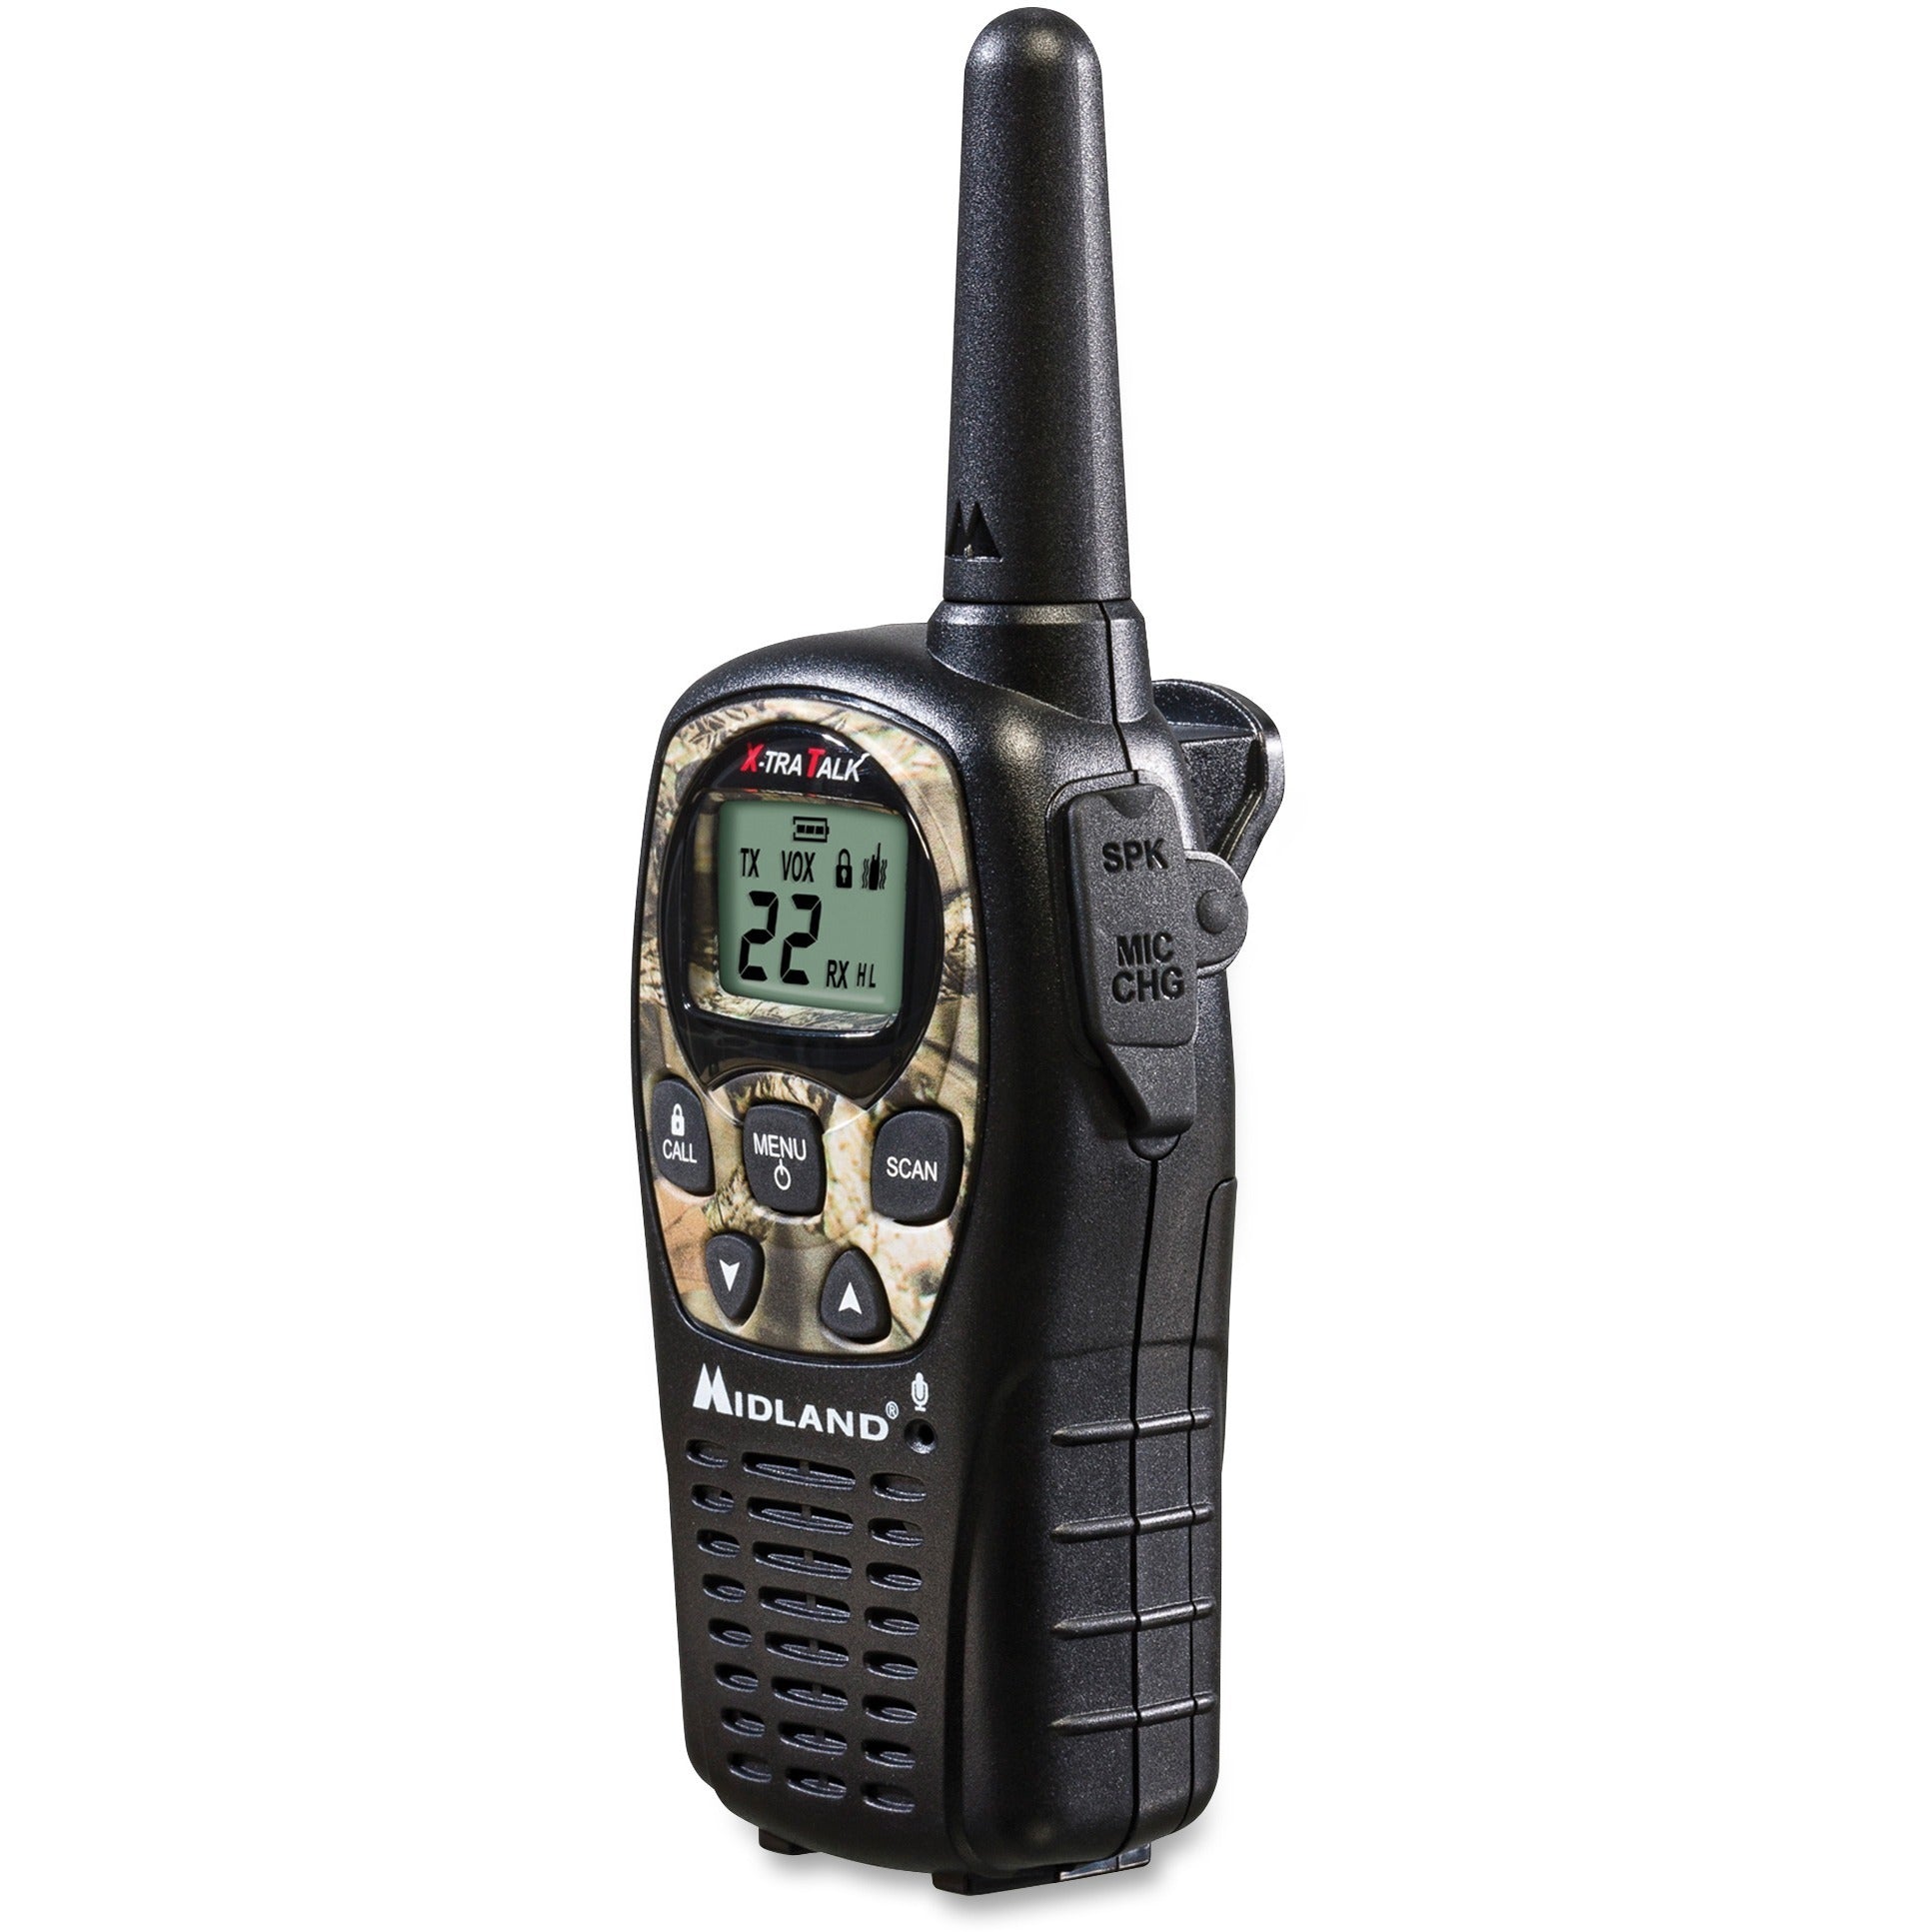 Midland LXT535VP3 24-mile Range 2-Way - 22 Radio Channels - 22 GMRS - Upto 126720 ft - Auto Squelch, Keypad Lock, Silent Operation - Water Resistant - Camouflage, Mossy Oak - 2 Each - 